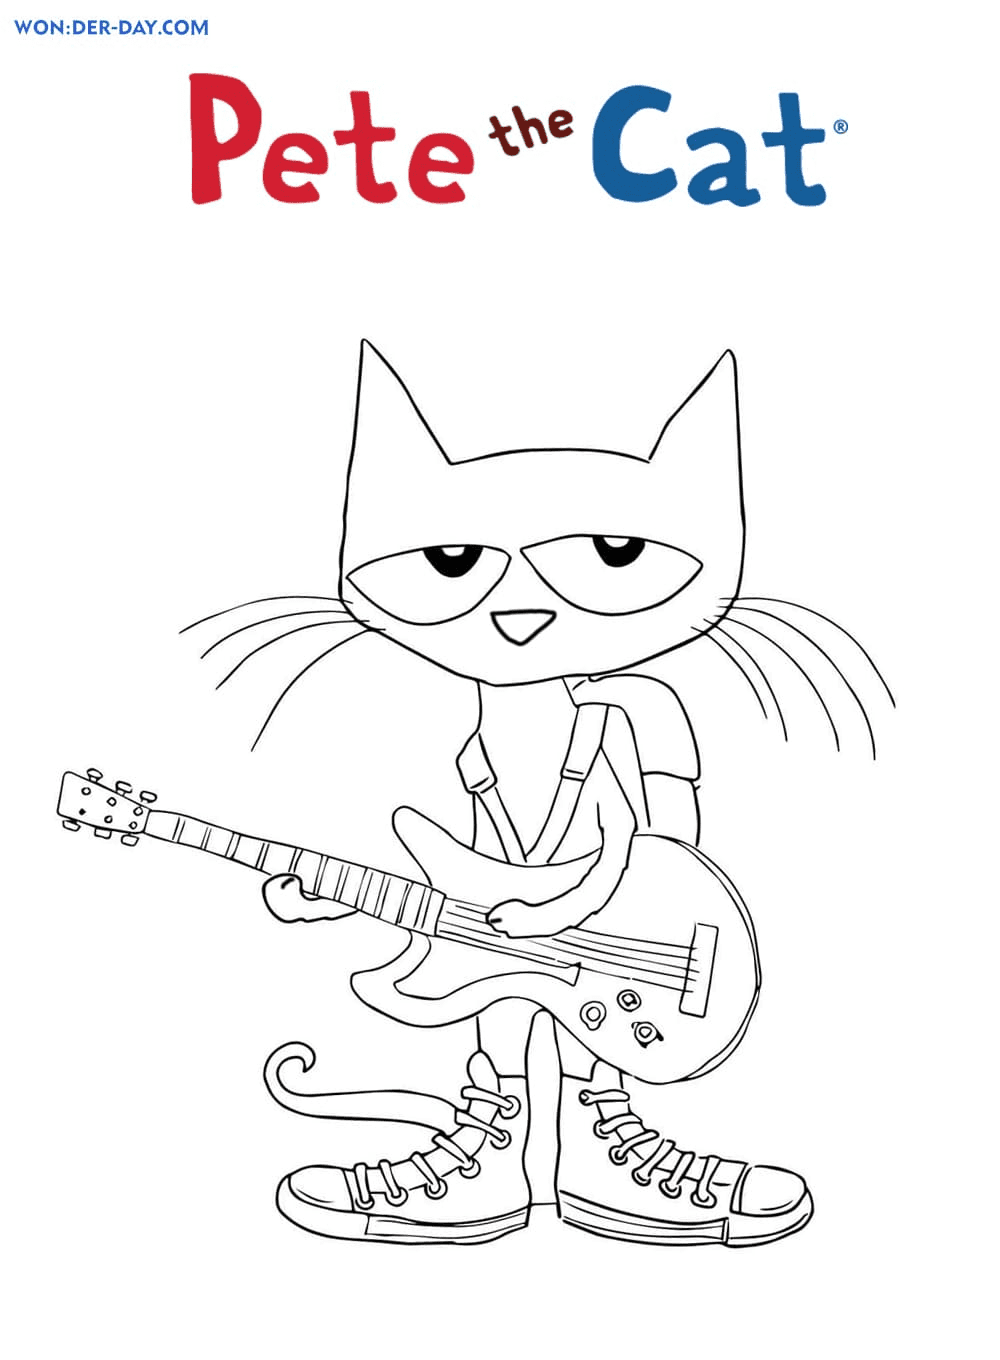 Pete the Cat plays the Guitar Coloring Page